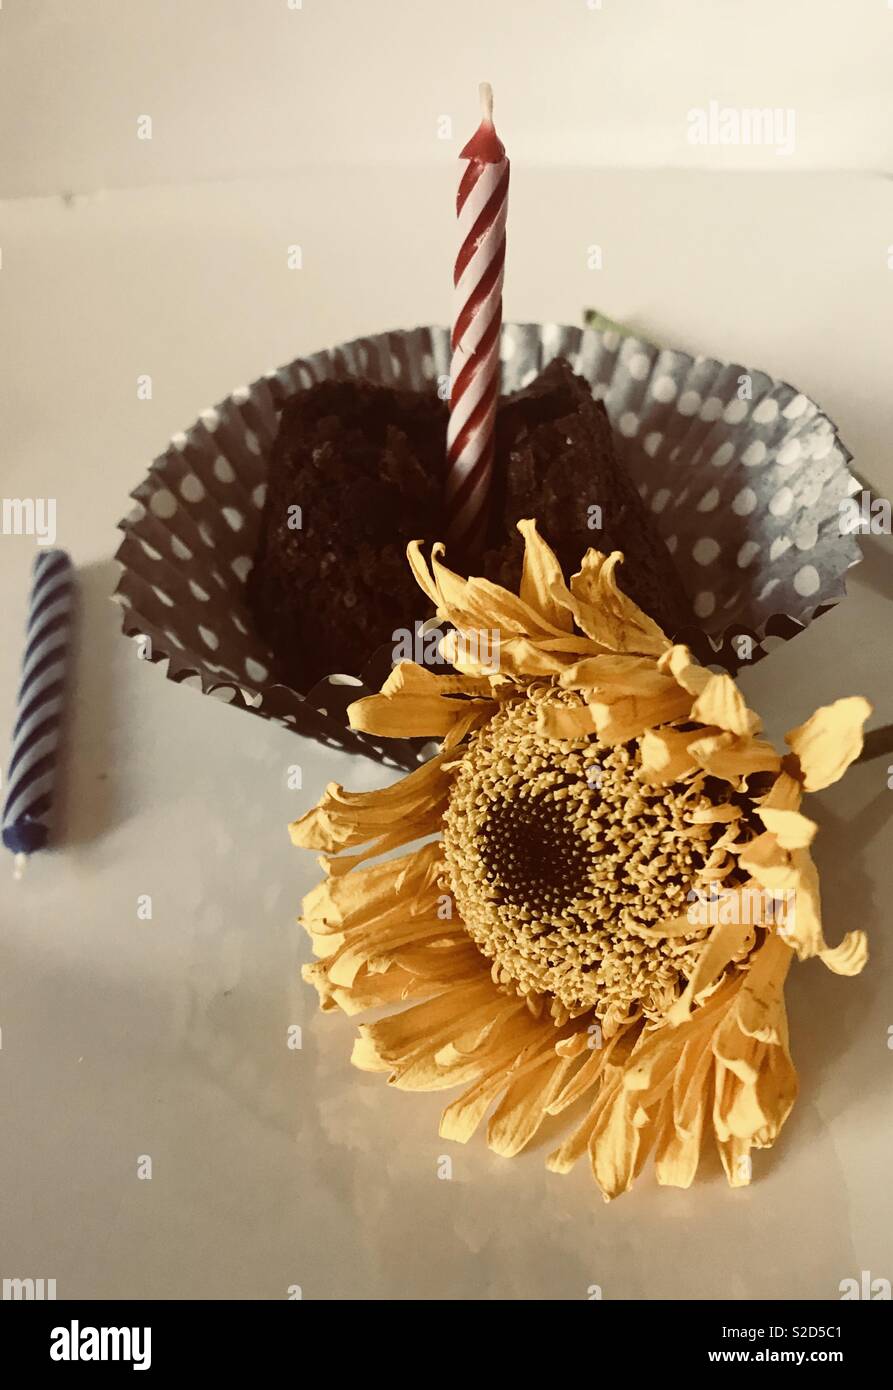 A Happy birthday brownie cupcake with a red and white striped candle on top. Black and white Polka dot cupcake liner, yellow daisy and a blue and white striped candle on display. Stock Photo